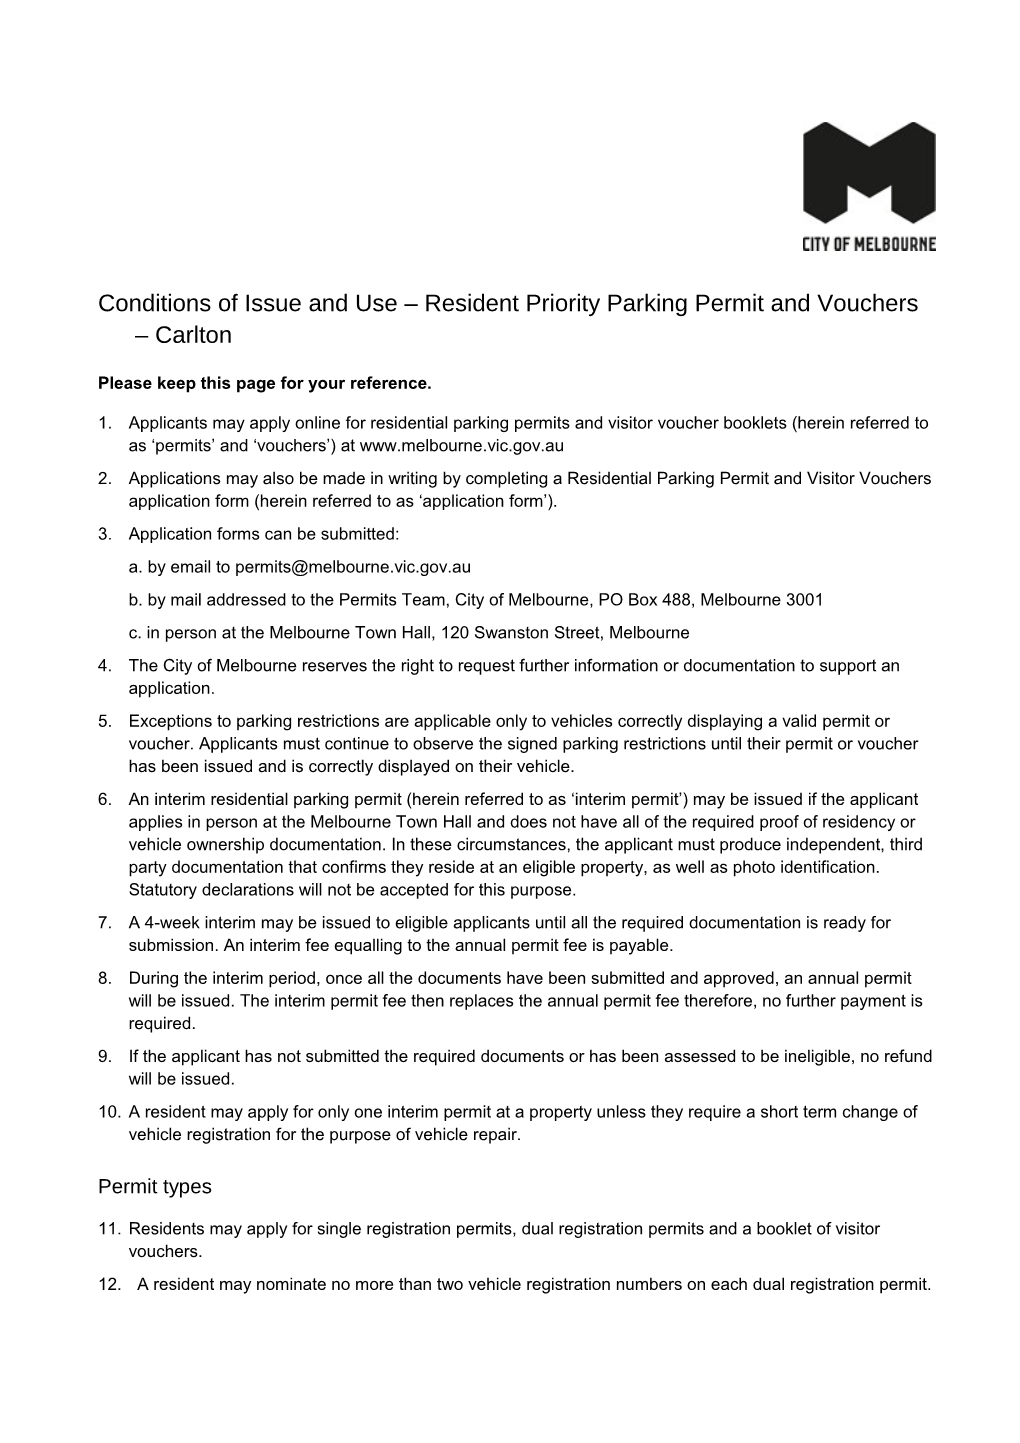 Conditions of Issue and Use Resident Priority Parking Permit and Vouchers Carlton